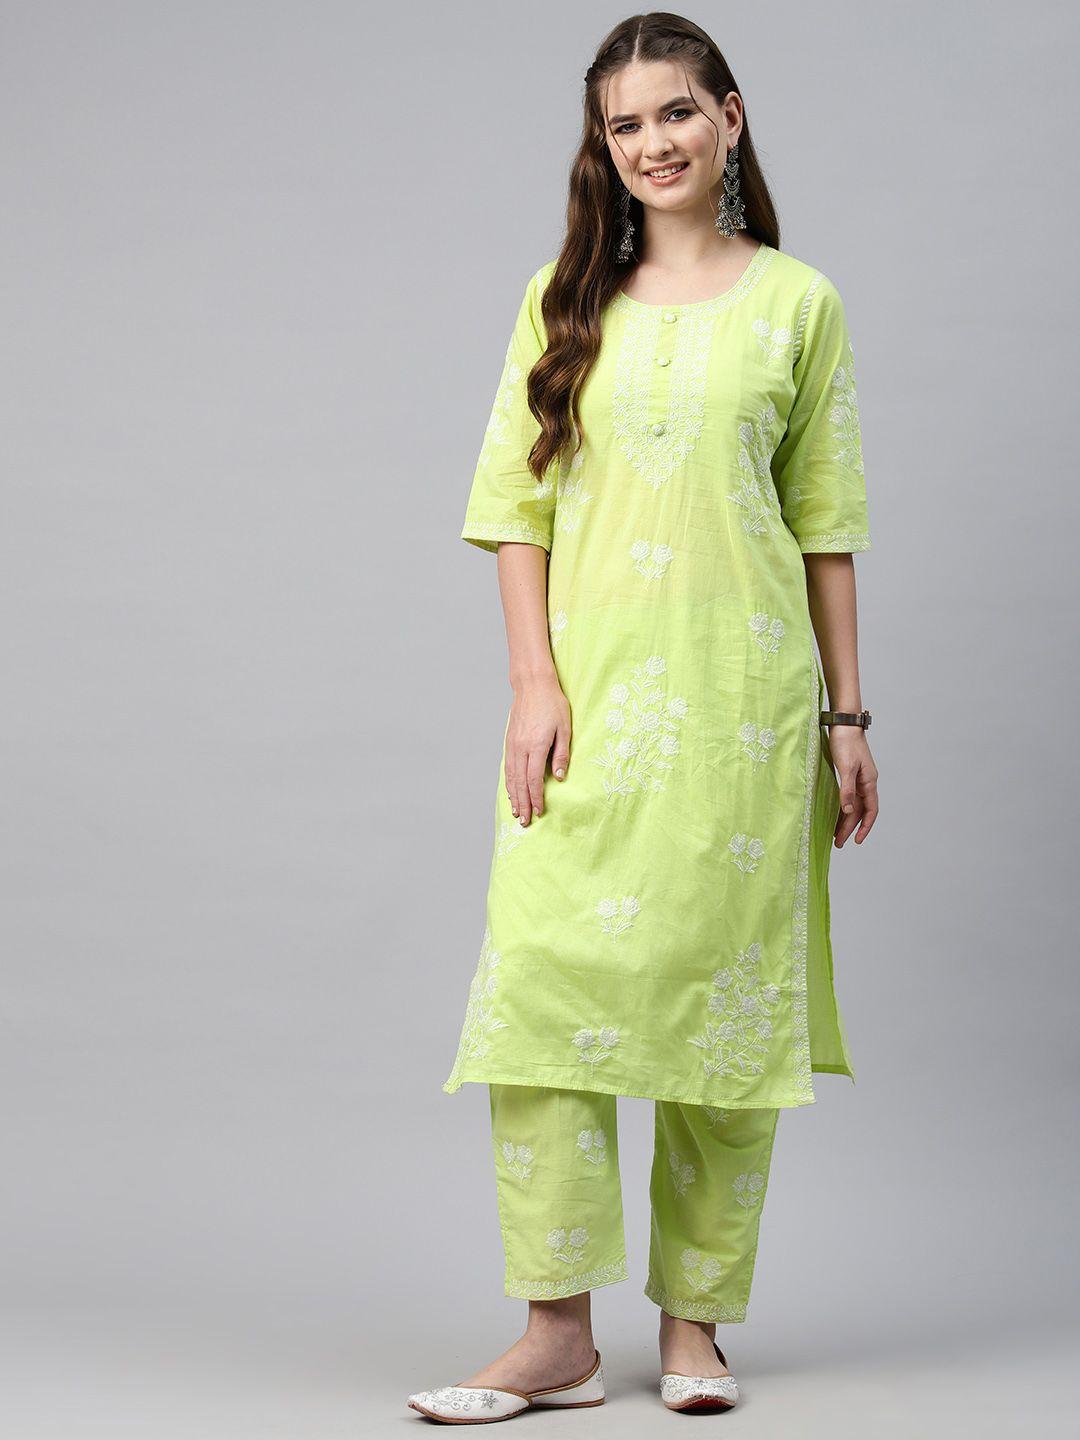 readiprint fashions floral embroidered thread work pure cotton kurta with trousers